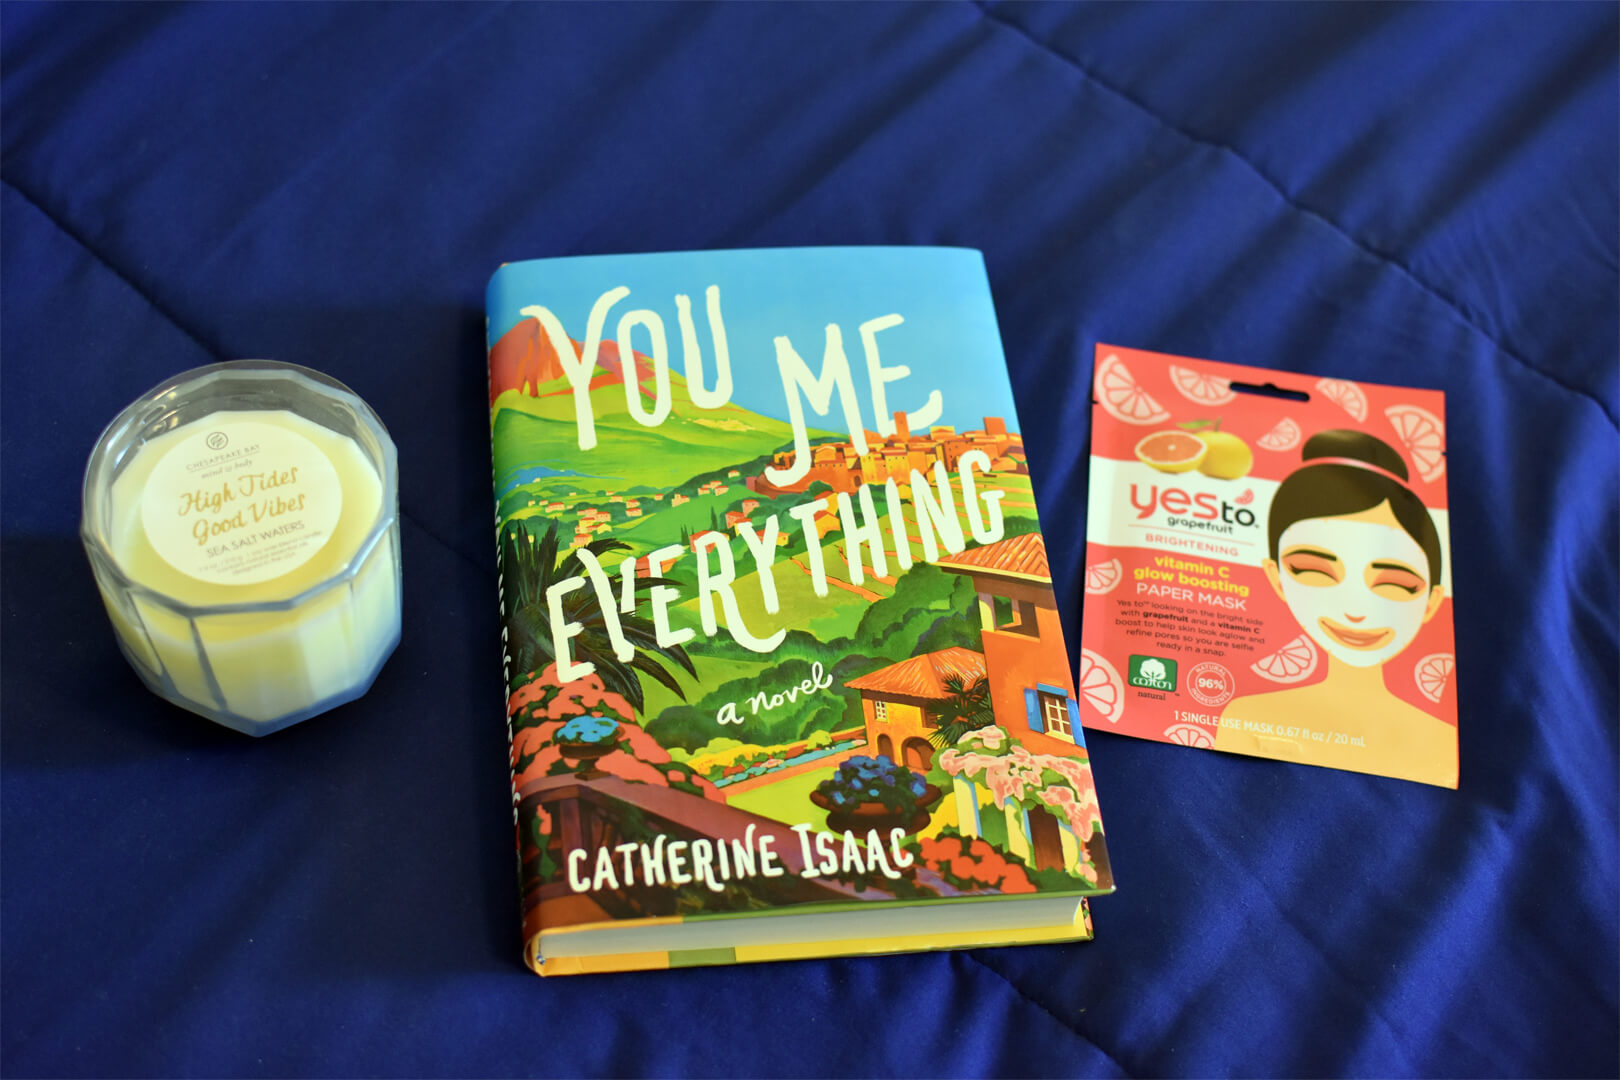 Tips on How To Self-Care while Reading